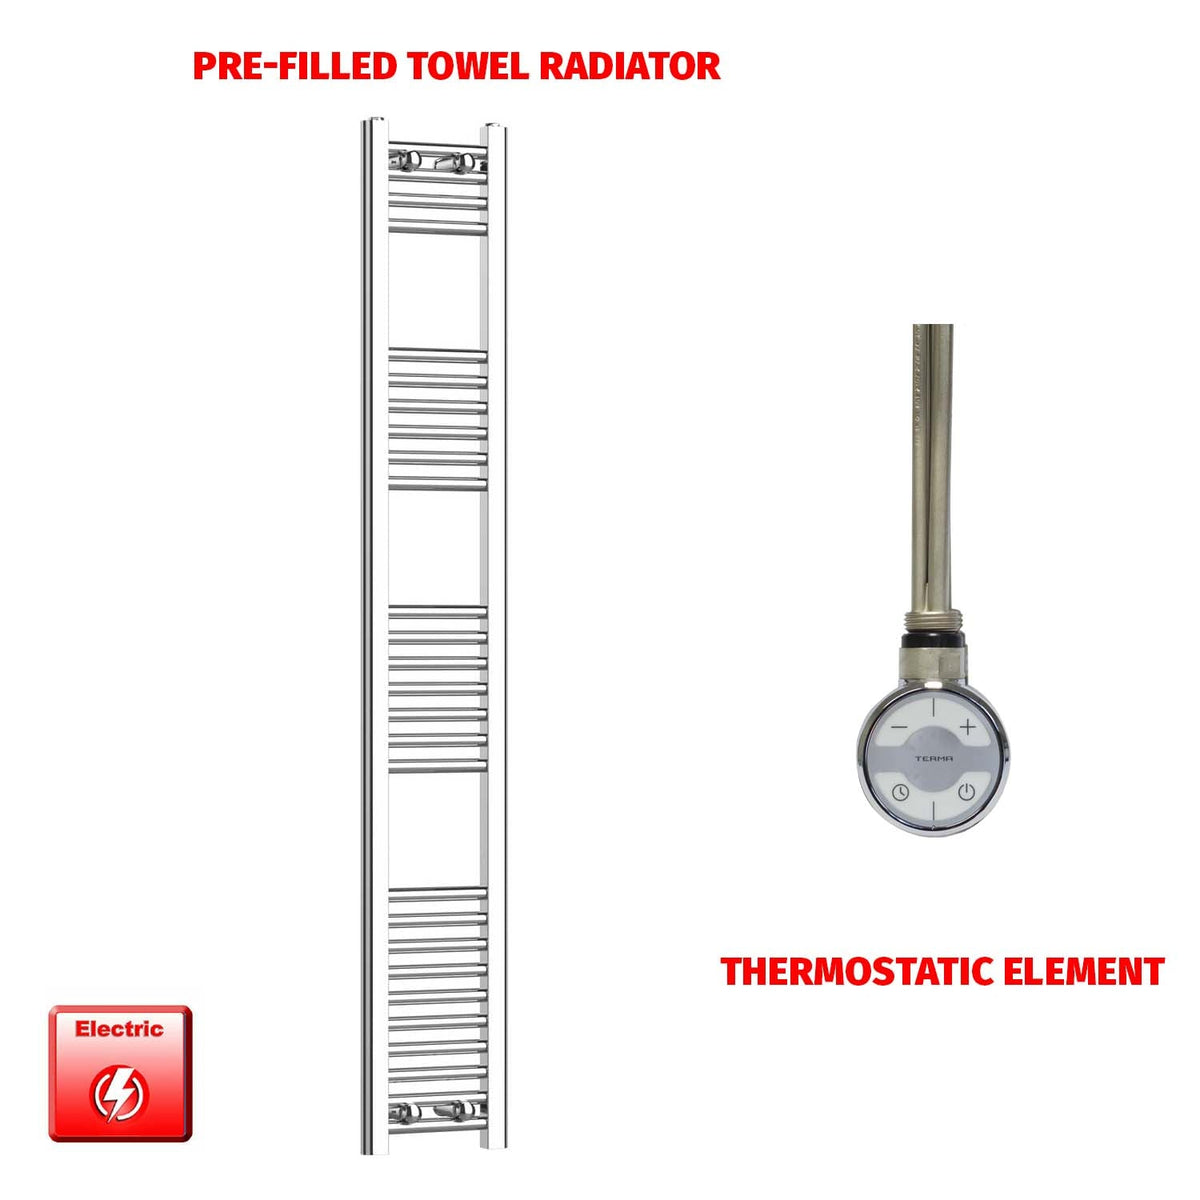 1600 x 200 Pre-Filled Electric Heated Towel Radiator Straight Chrome moa element no timer